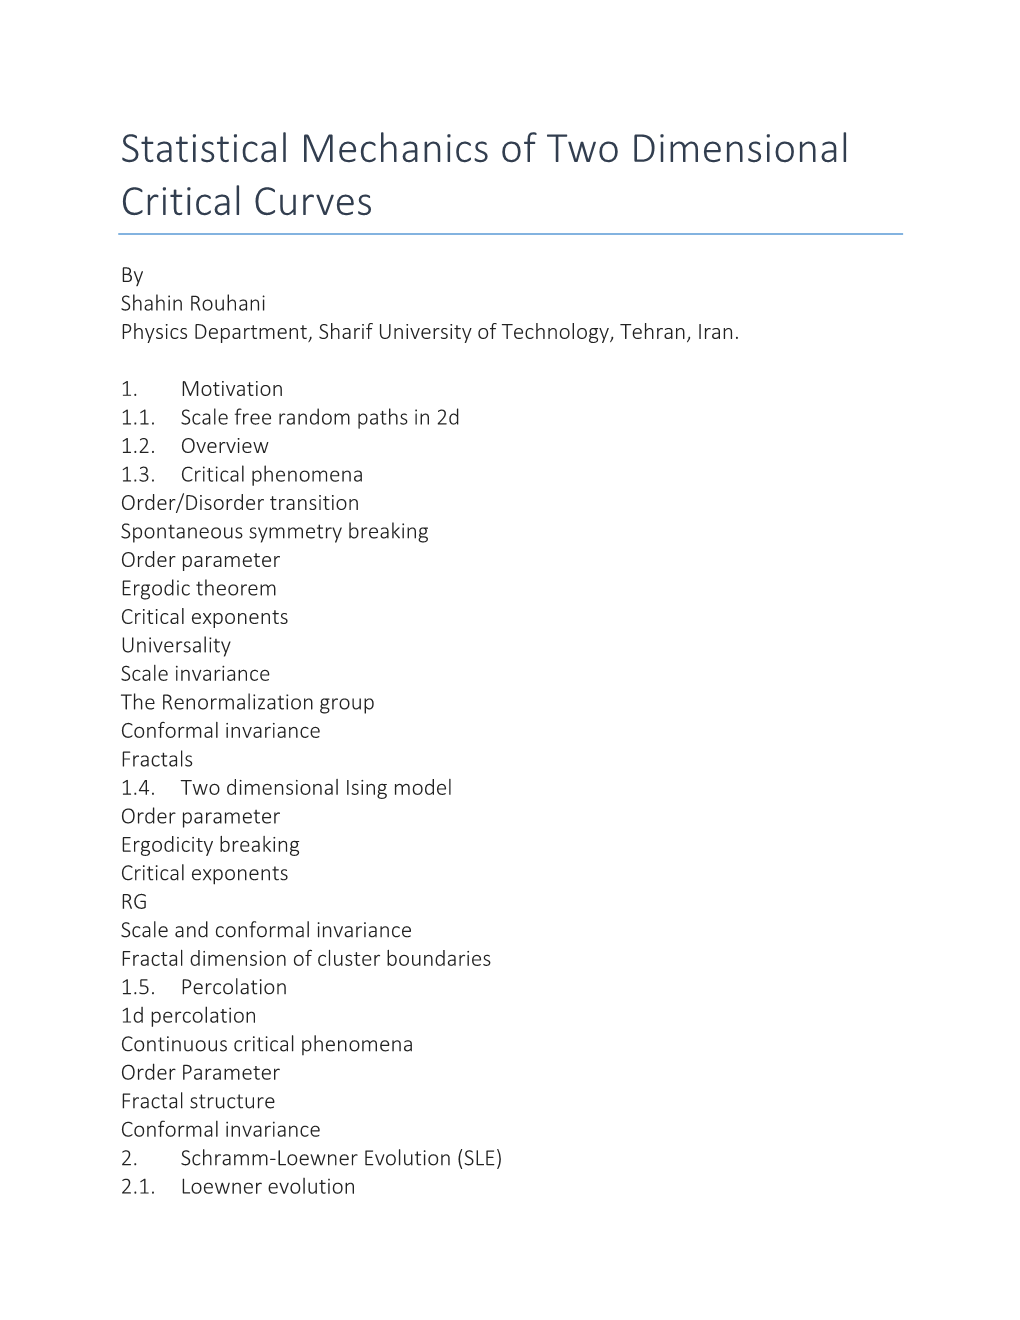 Statistical Mechanics of Two Dimensional Critical Curves